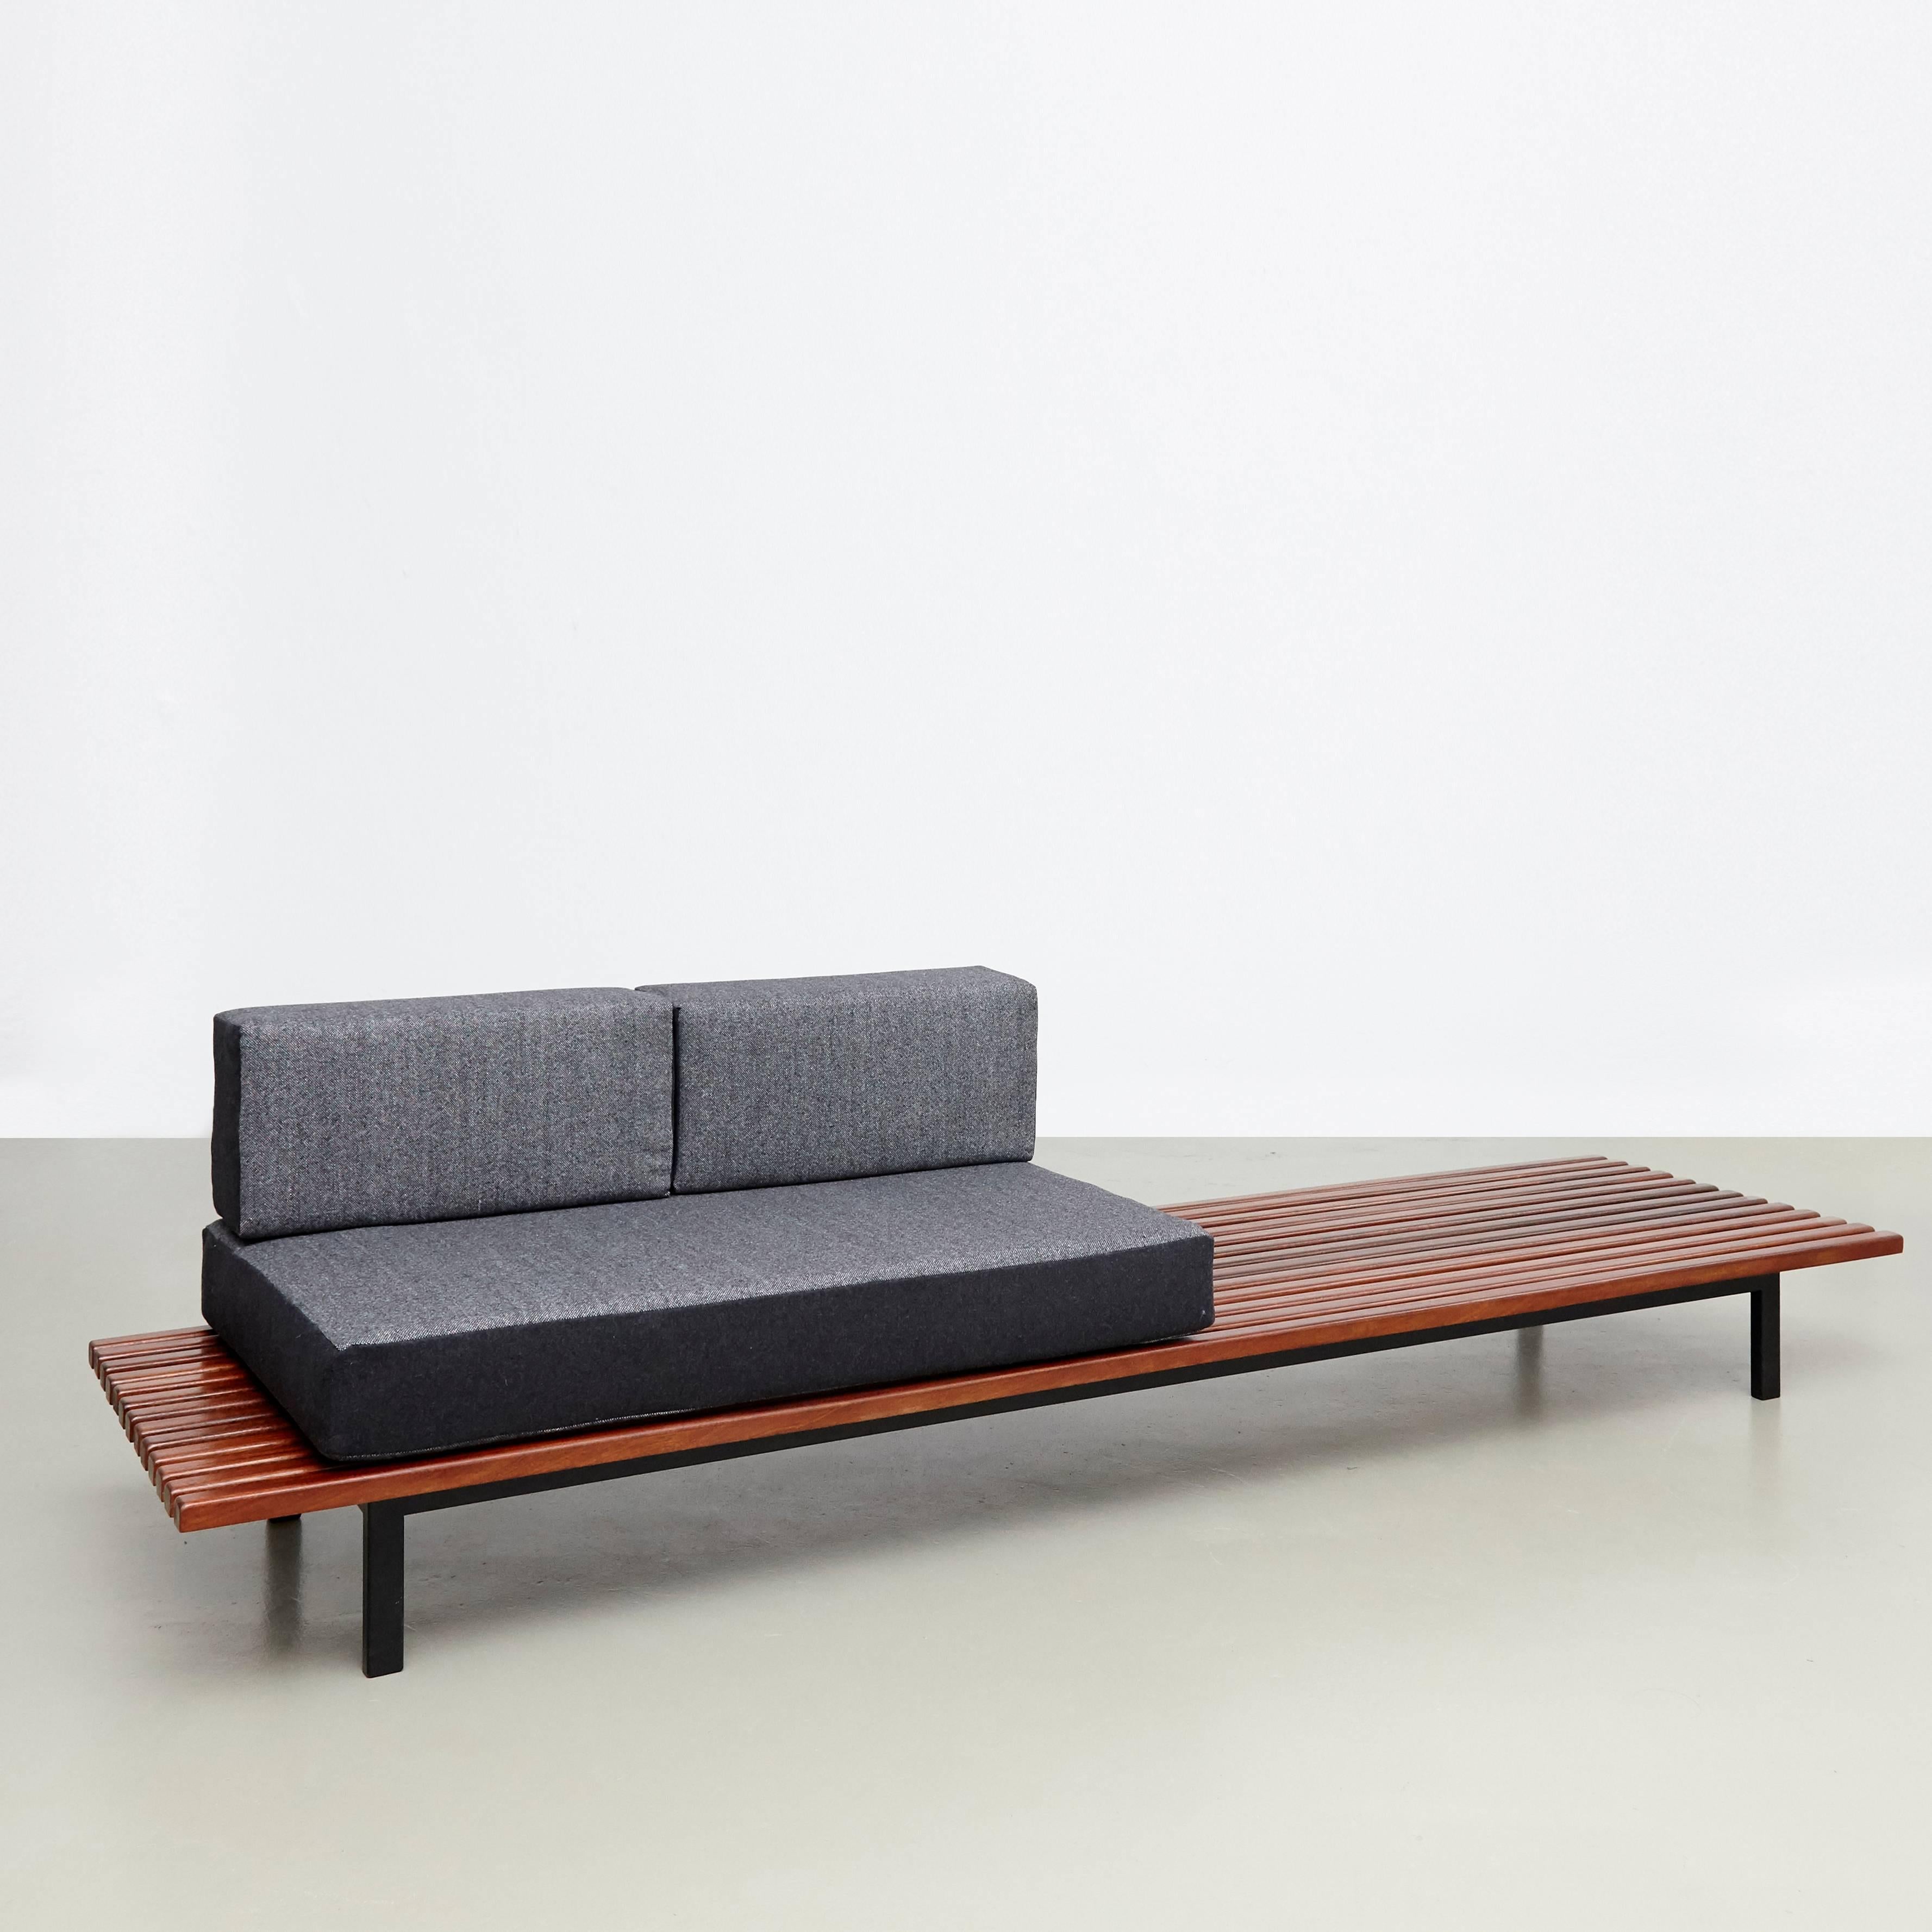 Bench designed by Charlotte Perriand, circa 1950.
Manufactured by Steph Simon (France), circa 1950.
Wood, lacquered metal frame and legs.

The cushions has been produced now according to the original measurements with high quality wool